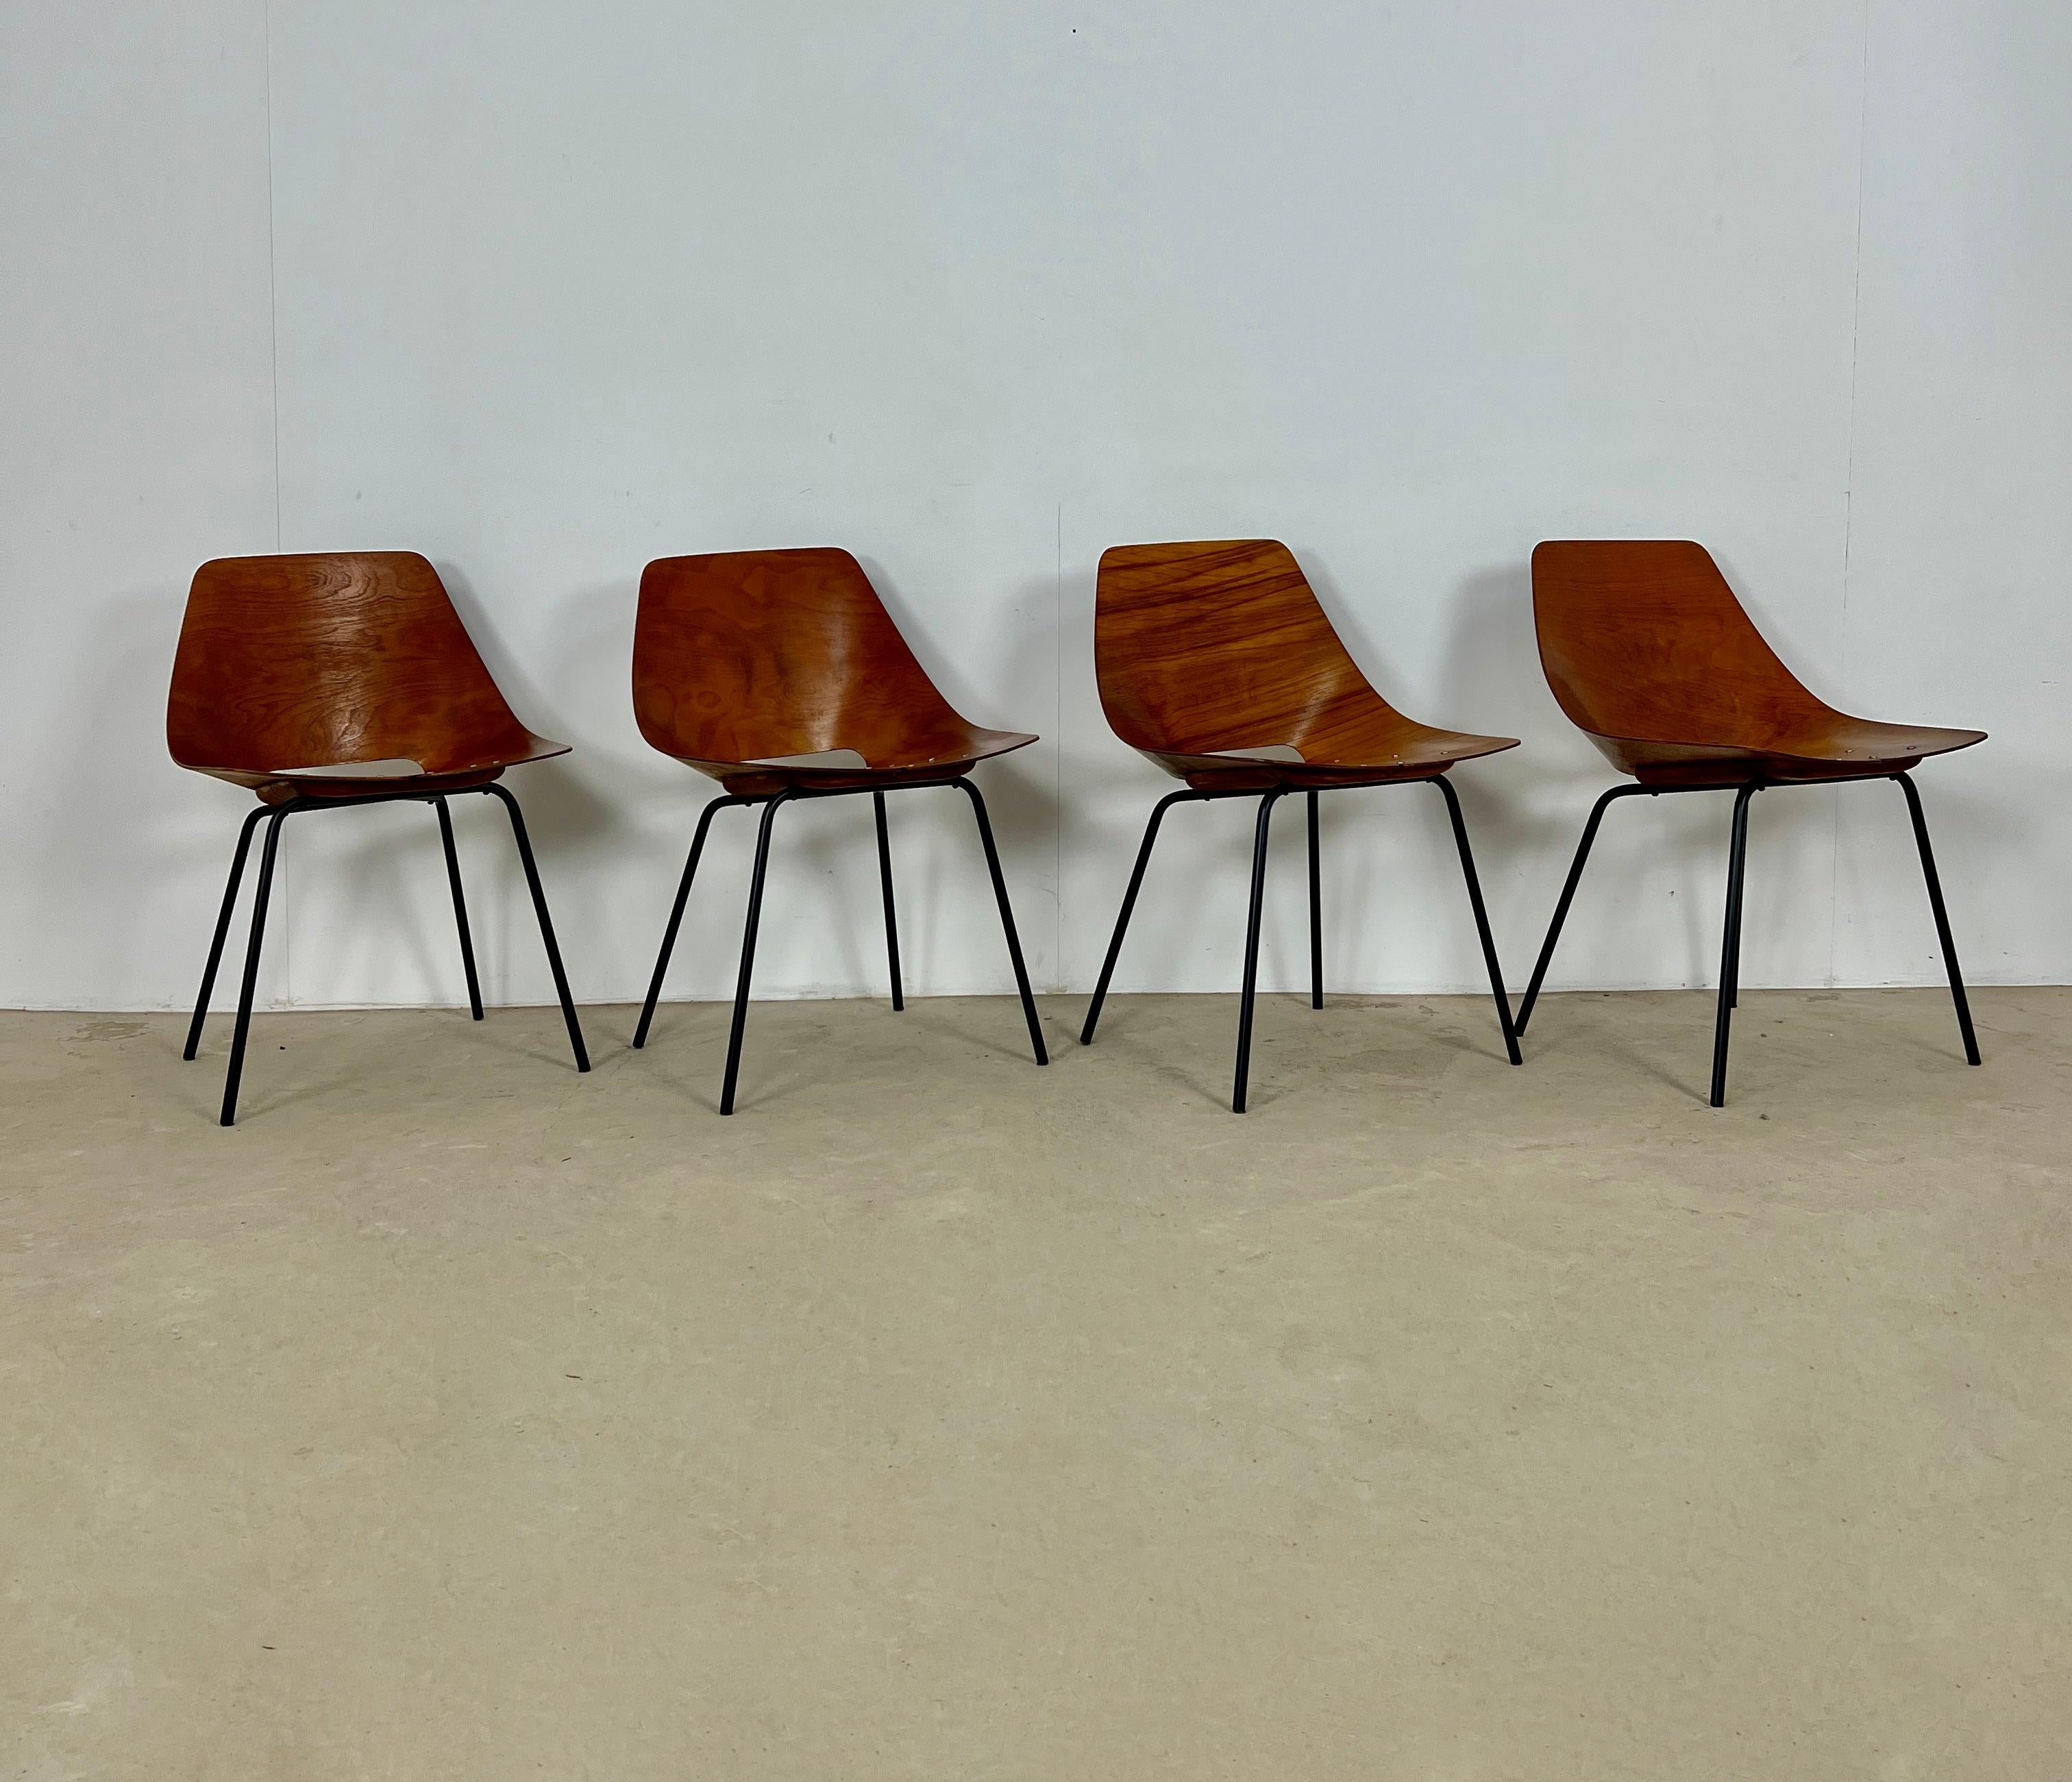 Set of 4 chairs in wood and metal in black color. Stamped Steiner under the seat. Wear due to time and age of the chairs. Seat height: 44cm